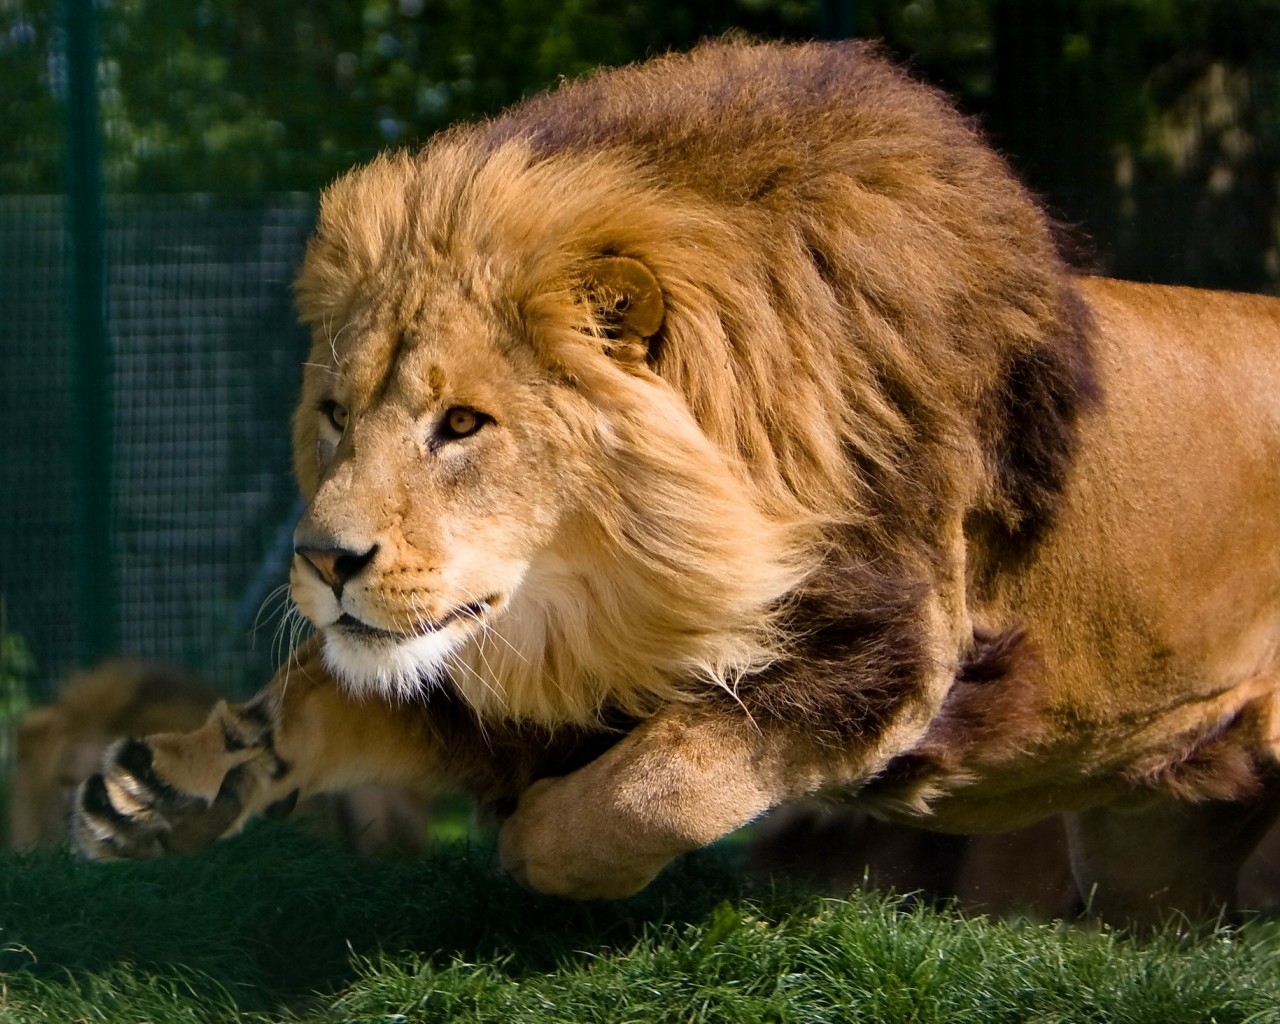 Mature Lion for 1280 x 1024 resolution